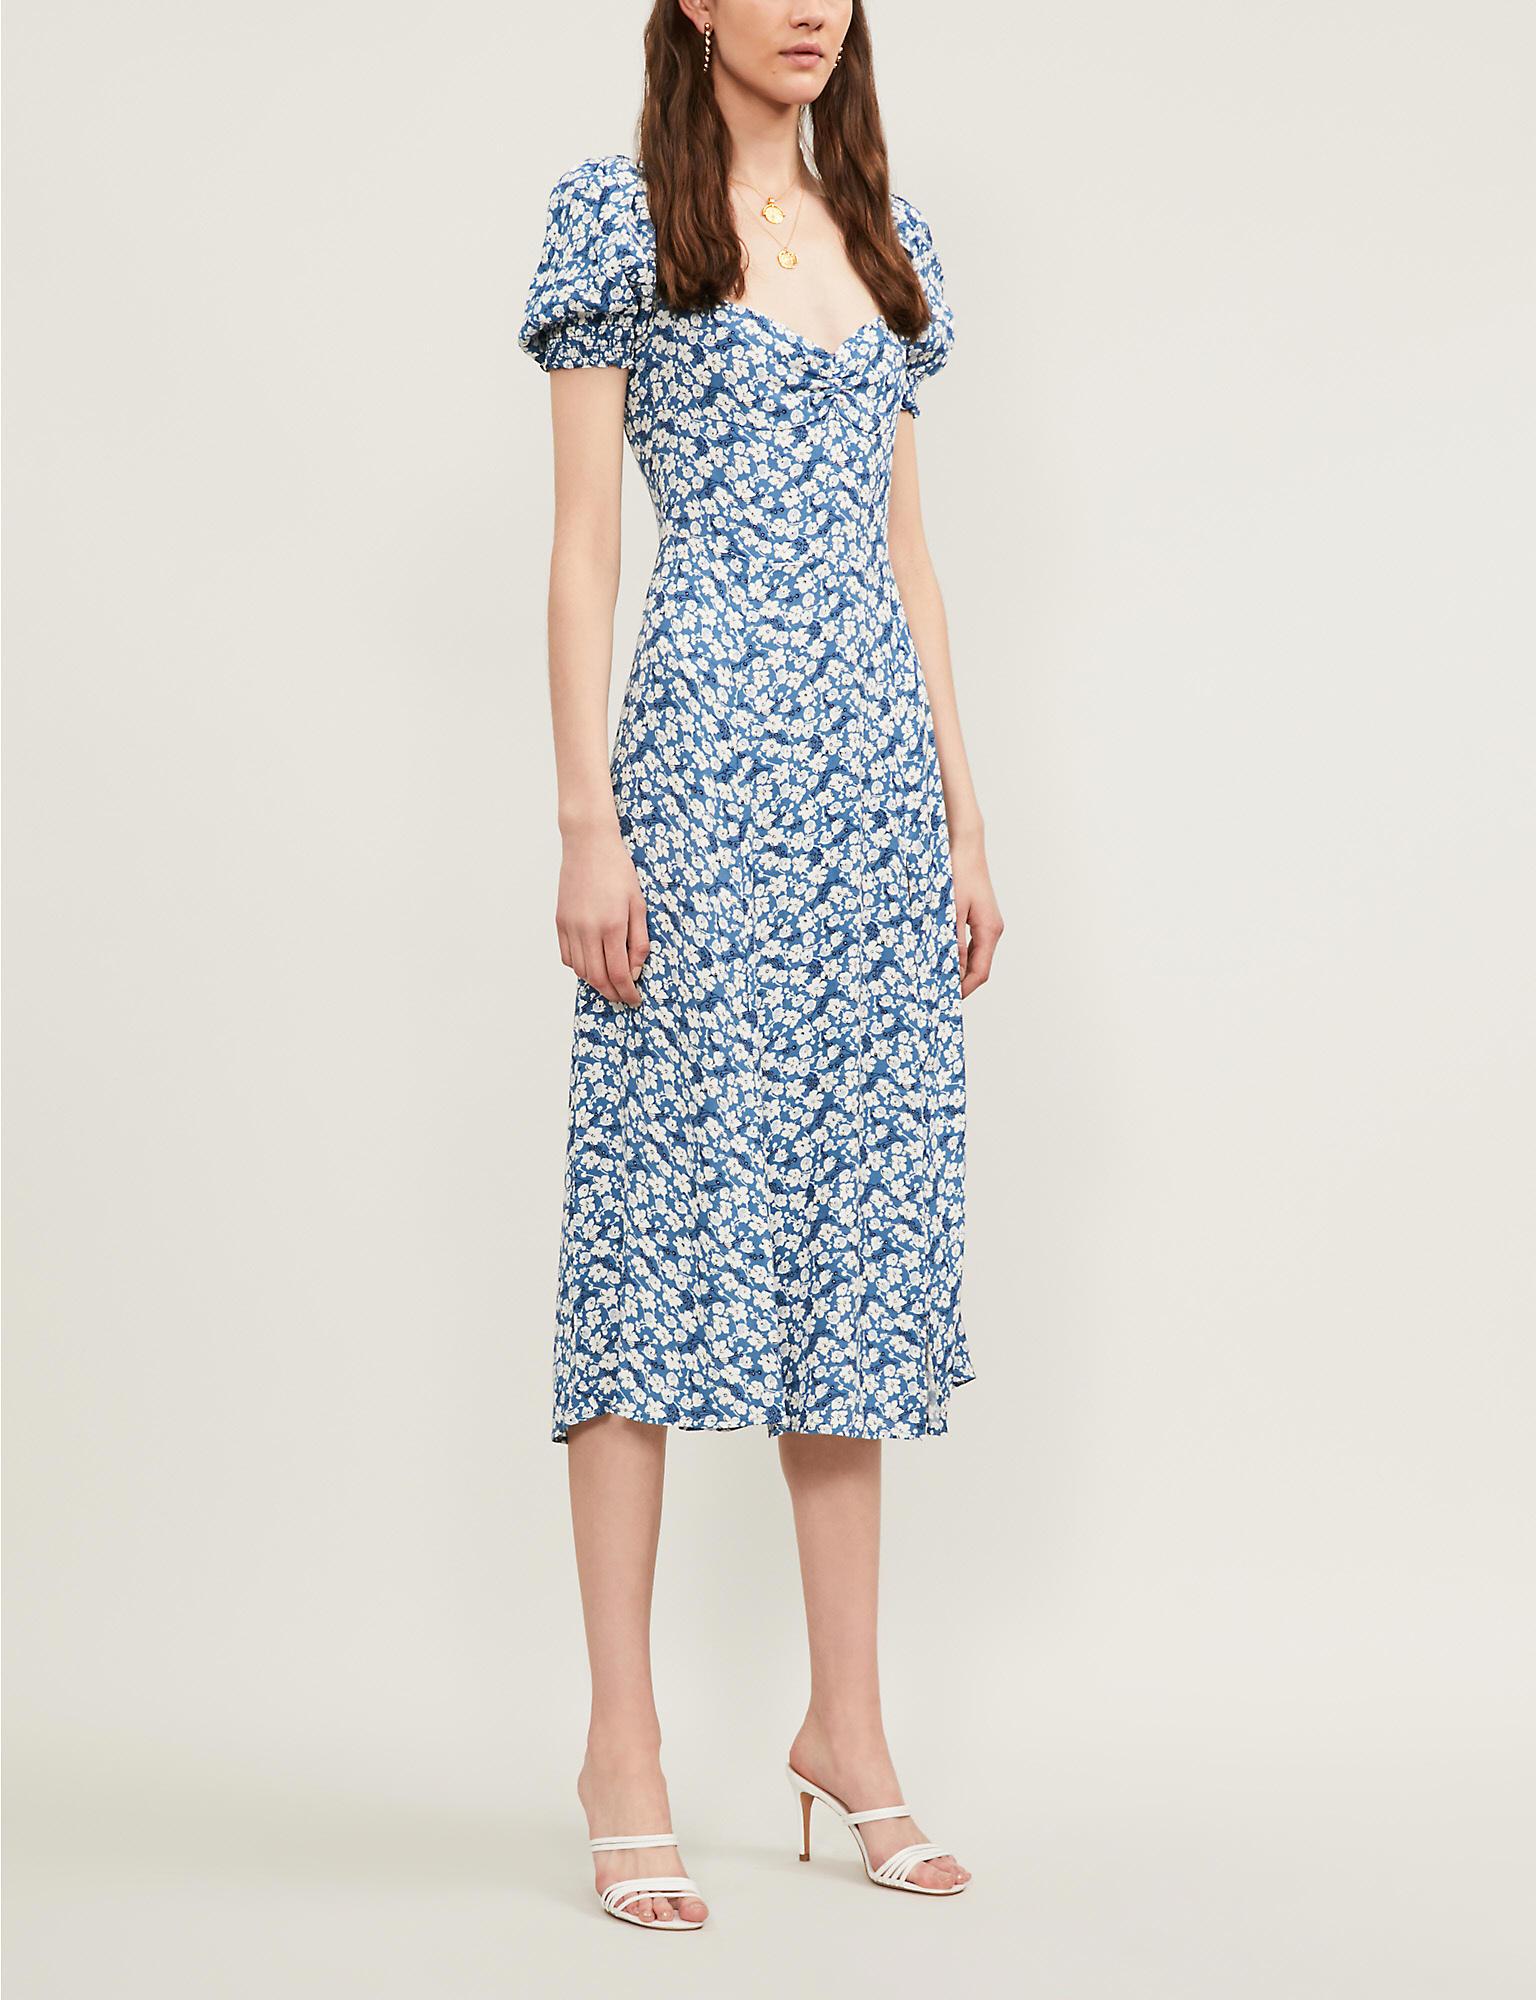 Reformation Synthetic Lacey Floral-print Crepe Midi Dress in Blue - Lyst